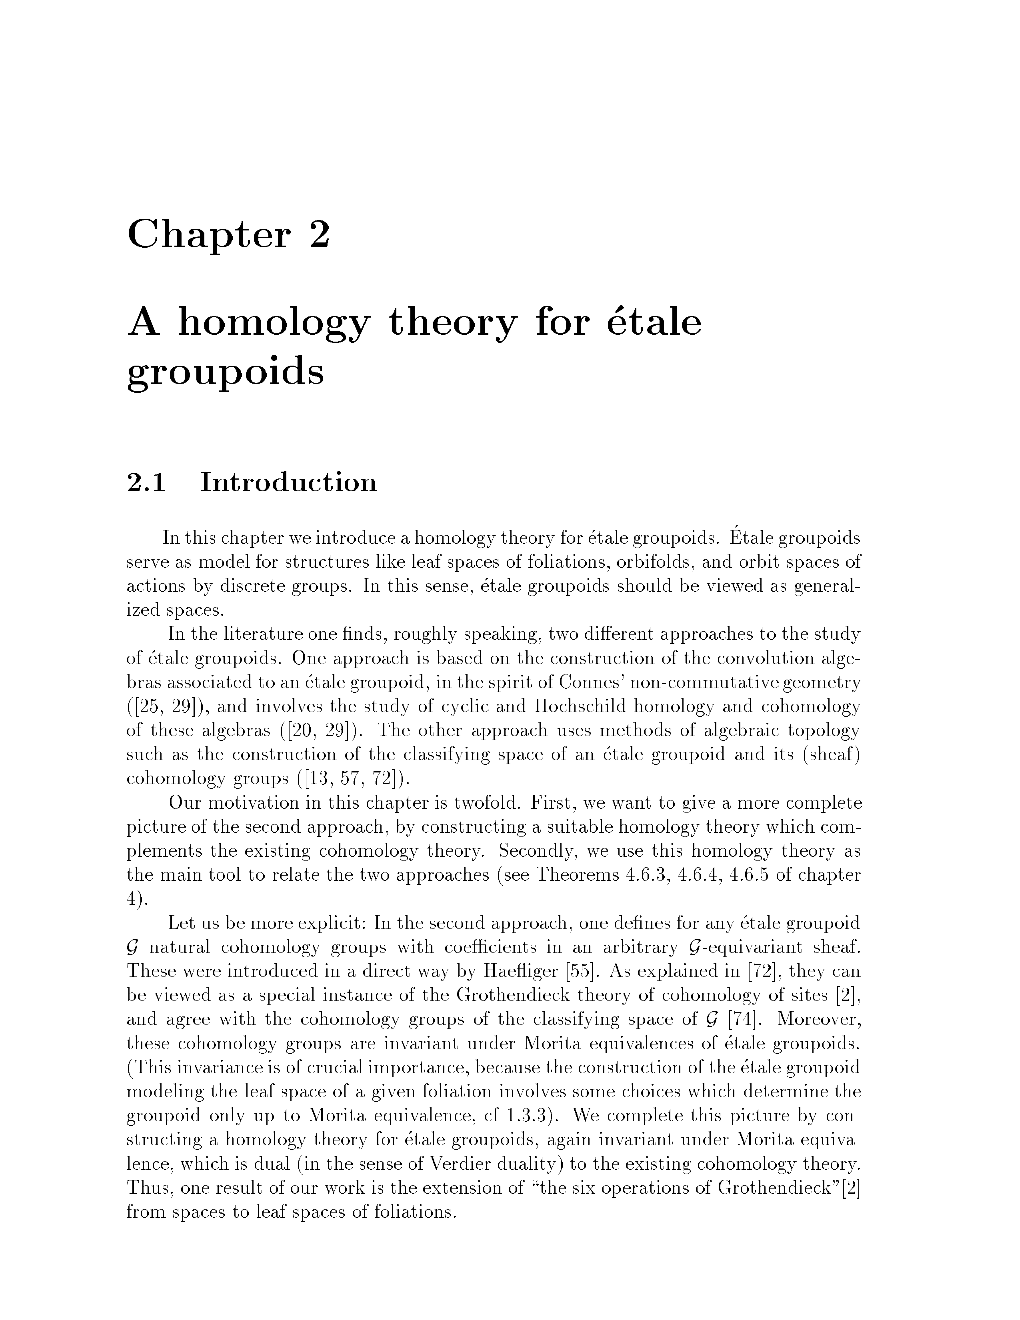 Chapter 2 a Homology Theory for Etale Groupoids